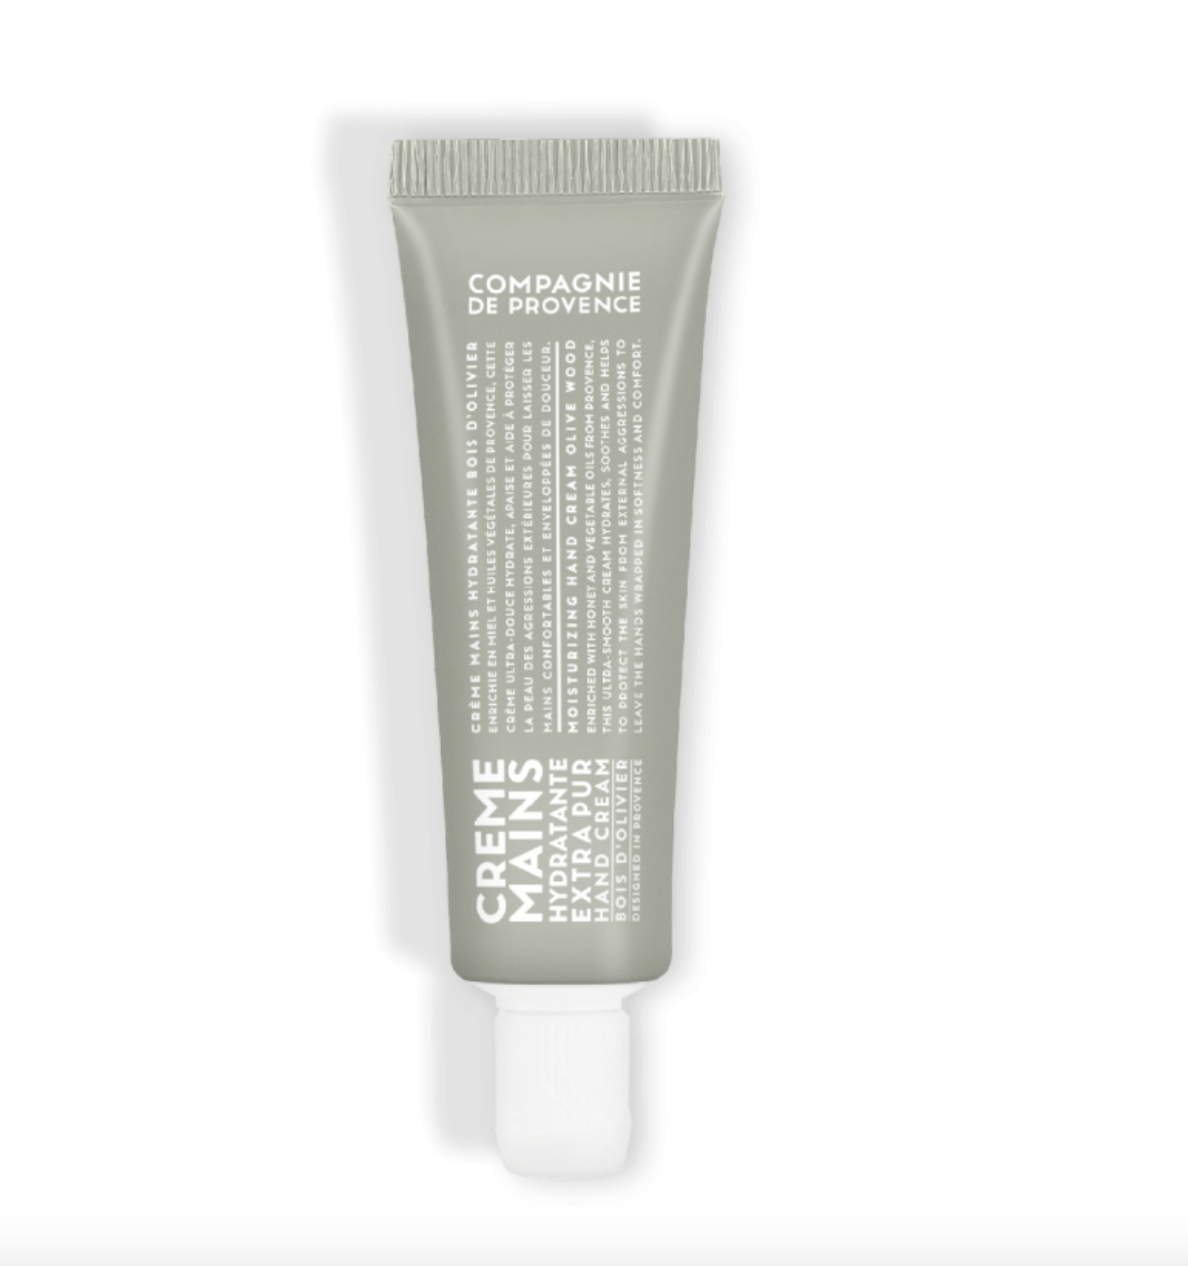 Compagnie de Provence Hand Cream 30ml - Olive Wood